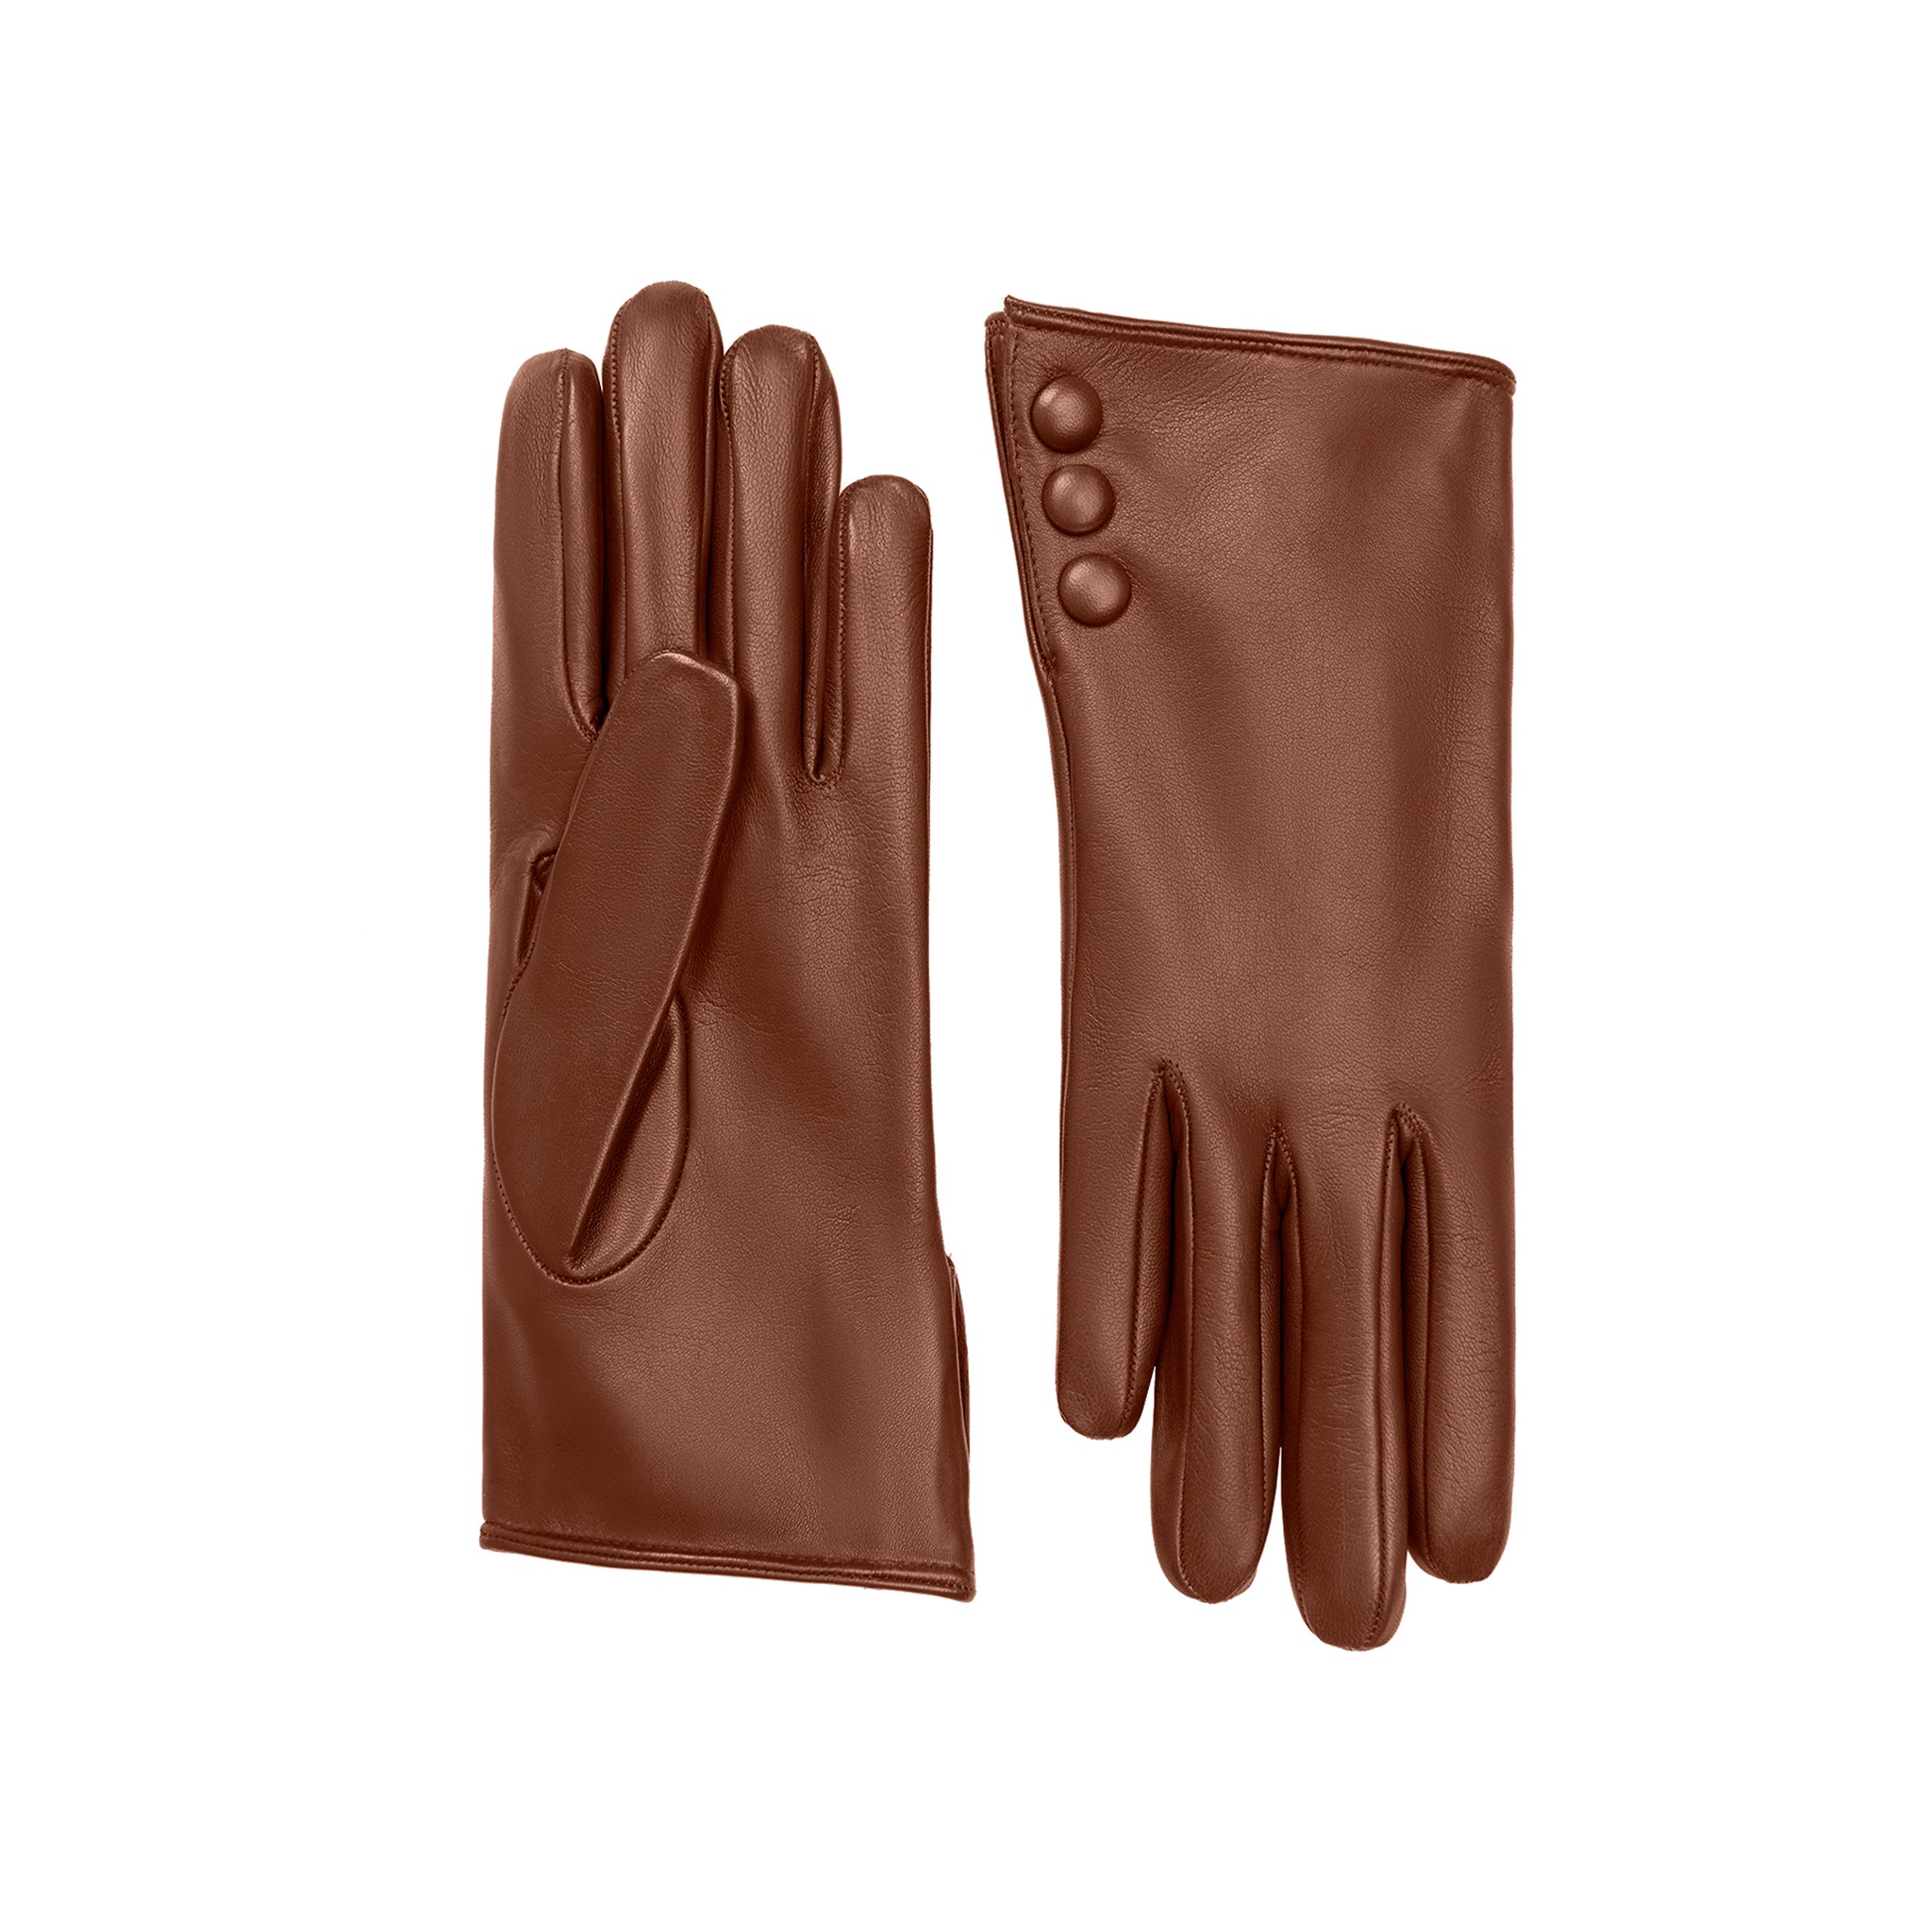 Celine | Leather Glove with Button Cuff